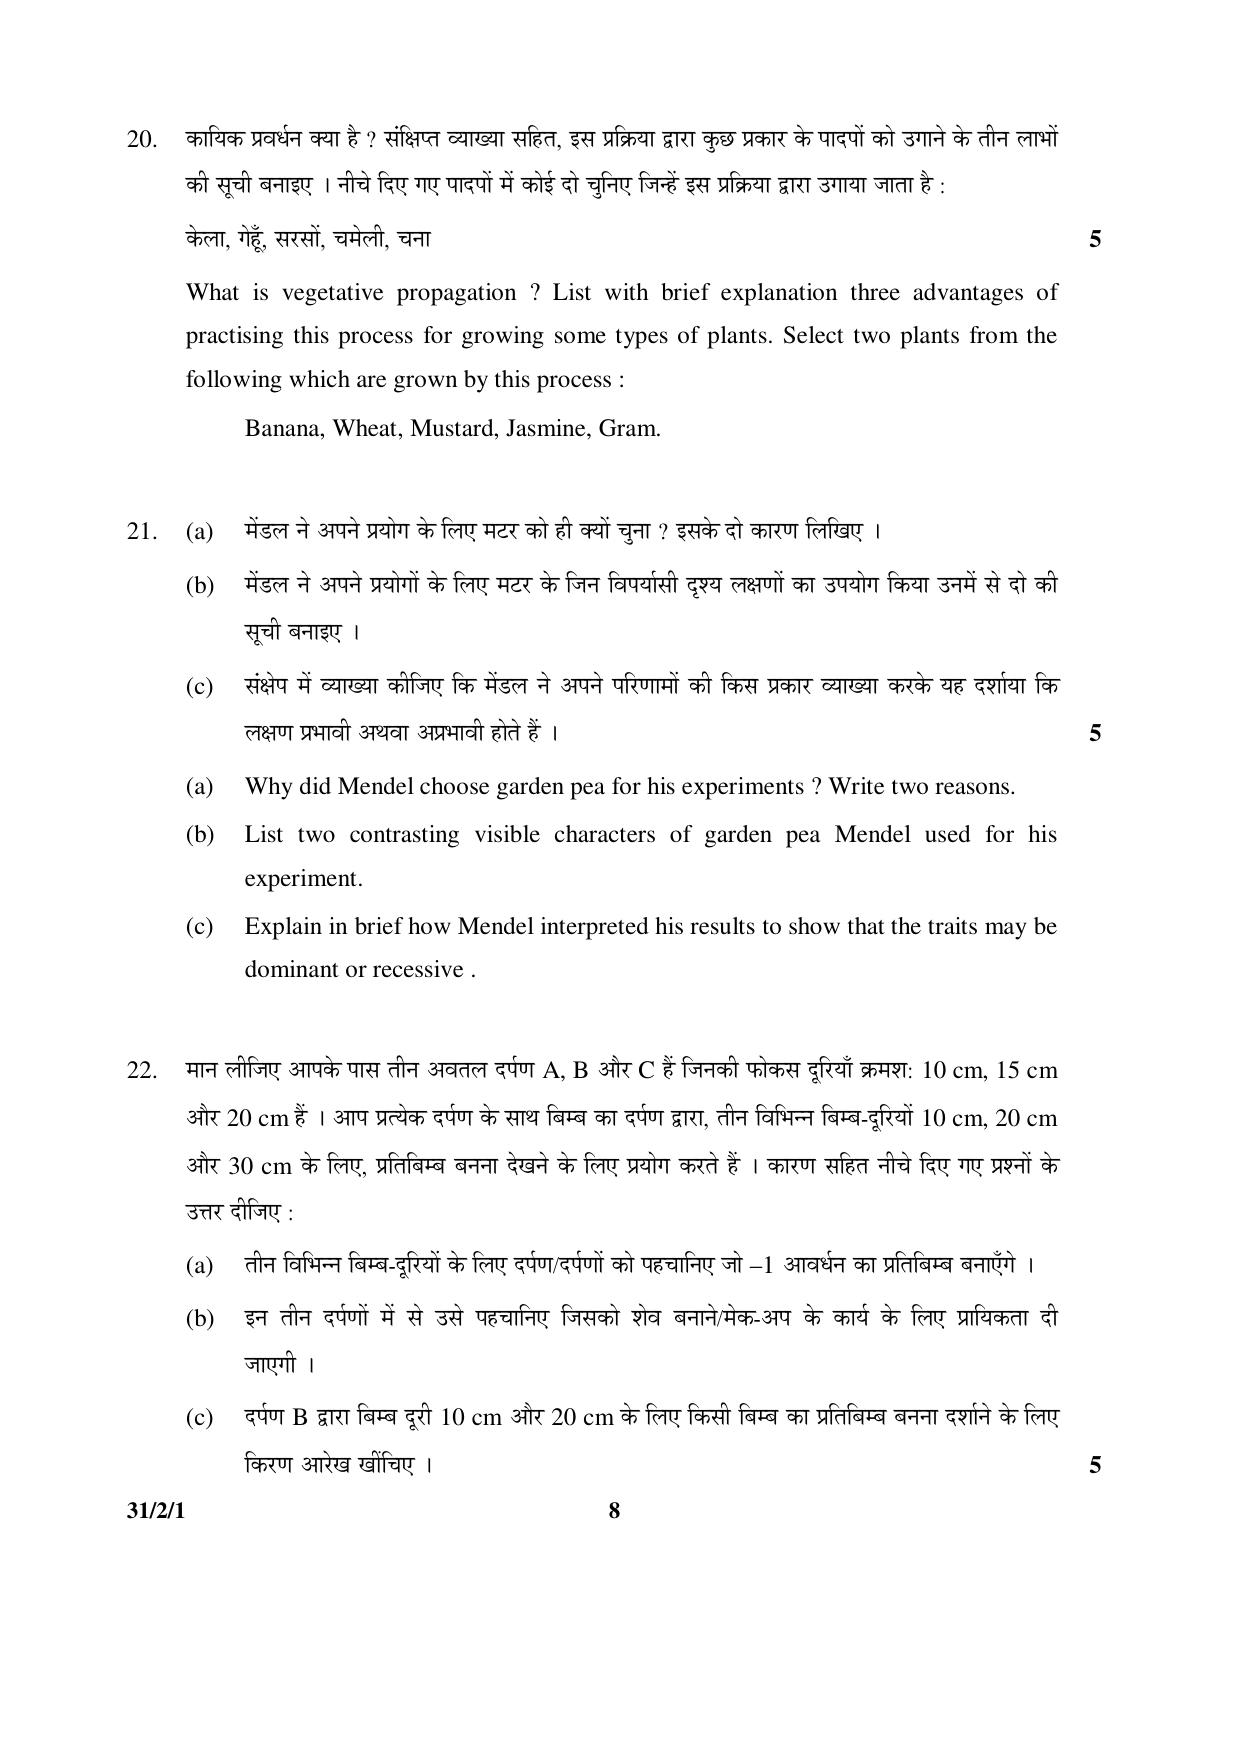 CBSE Class 10 31-2-1 _Science 2016 Question Paper - Page 8